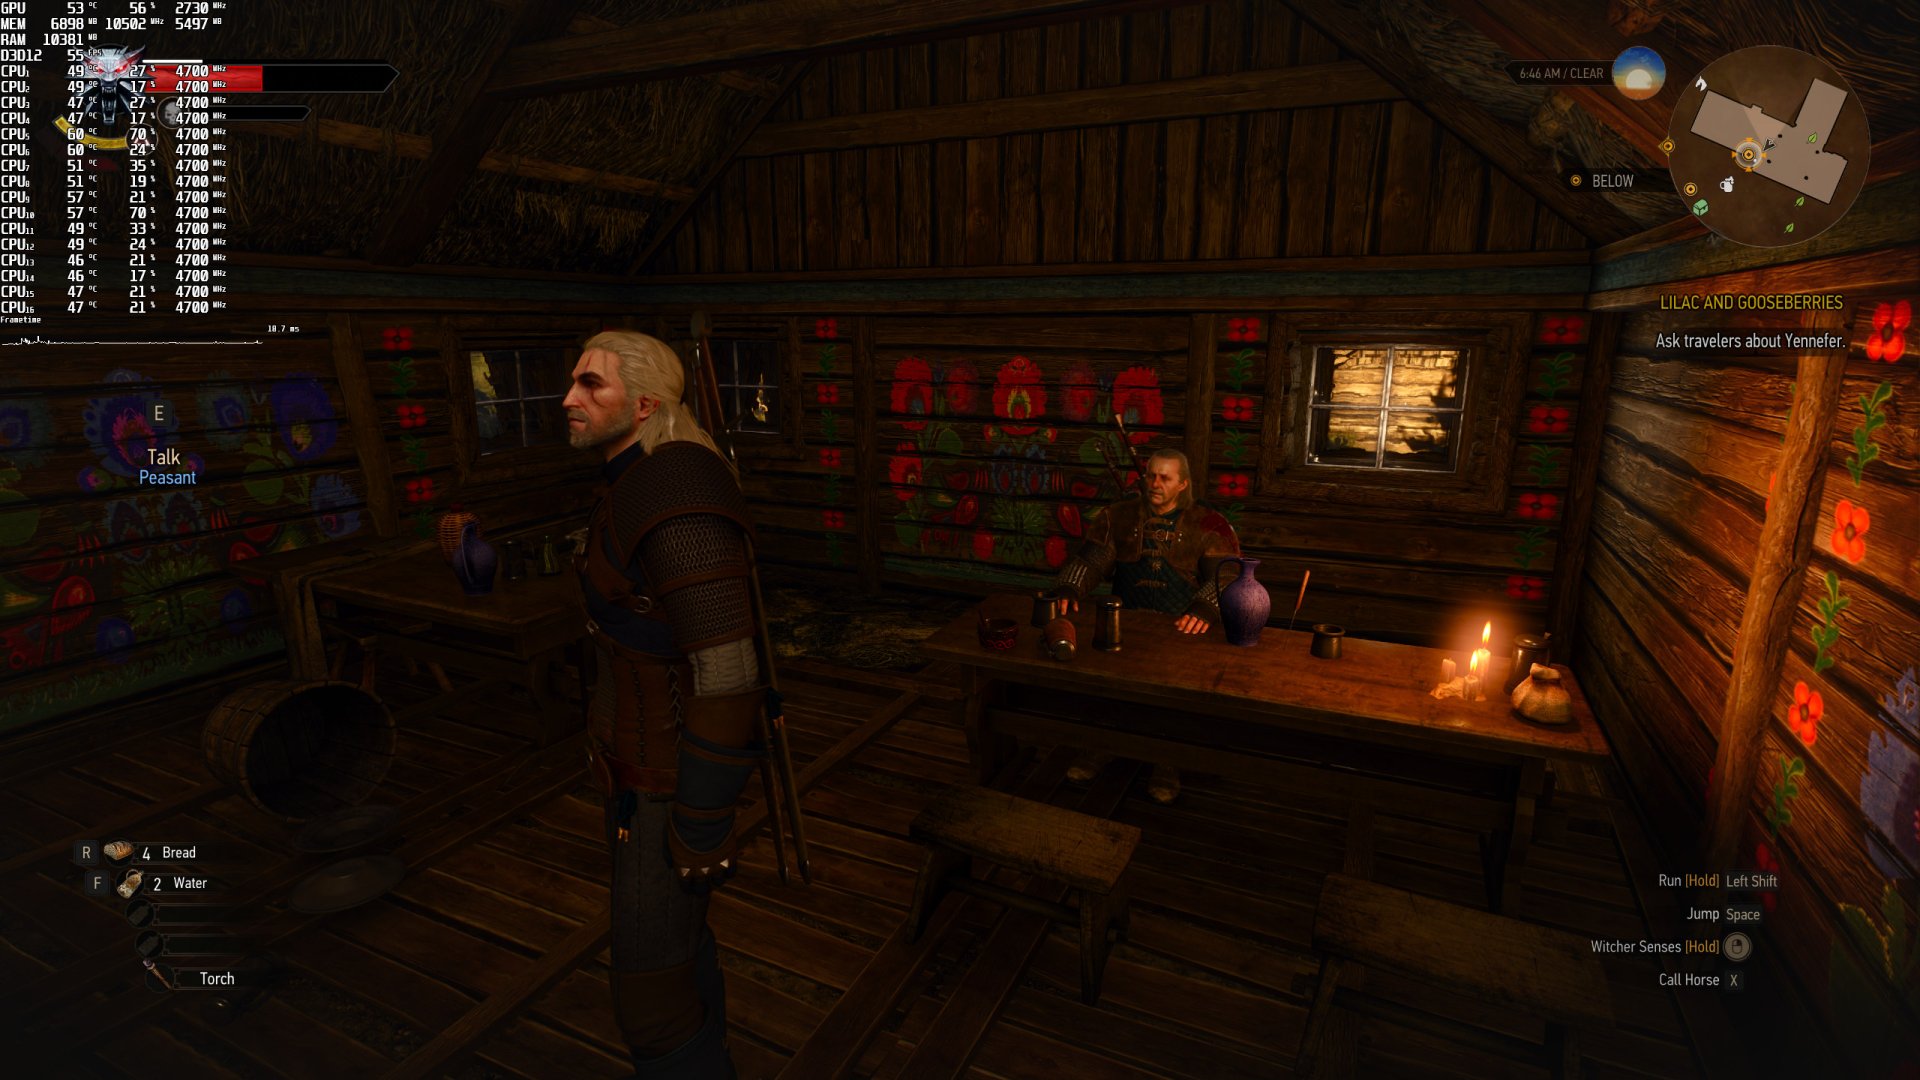 The Witcher 3 Ray Tracing Performance